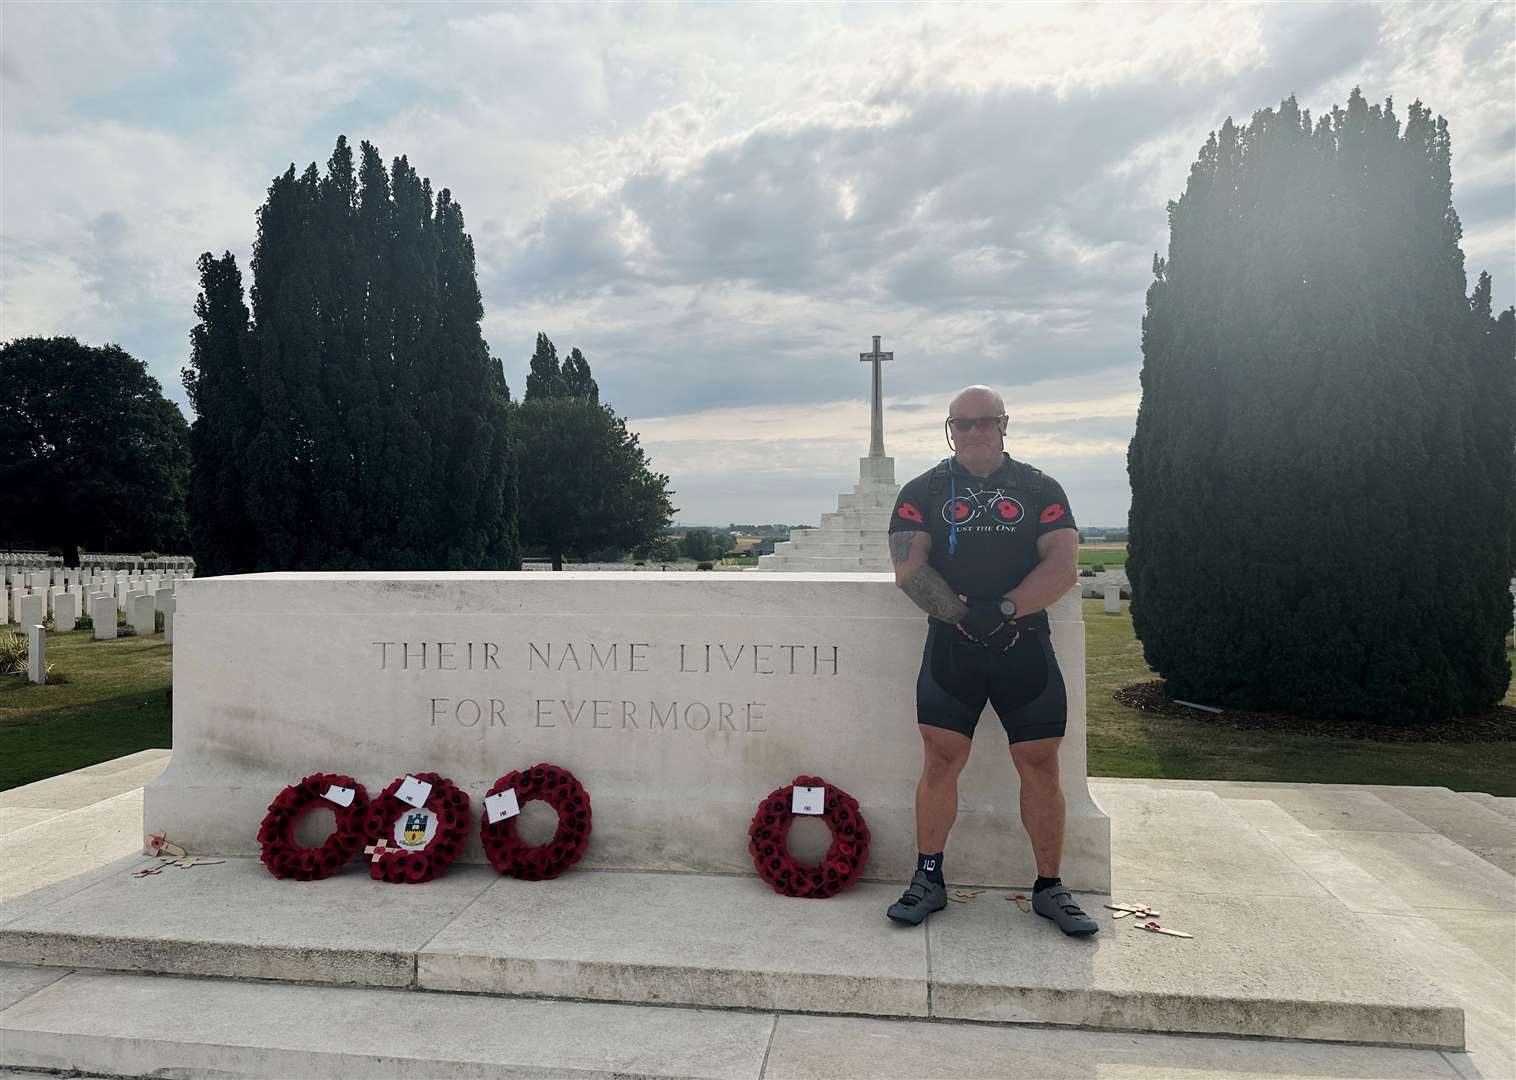 Kev cycled to Tyne Cot and other military graveyards during last year’s Pedal to Ypres challenge organised by the Royal British Legion.